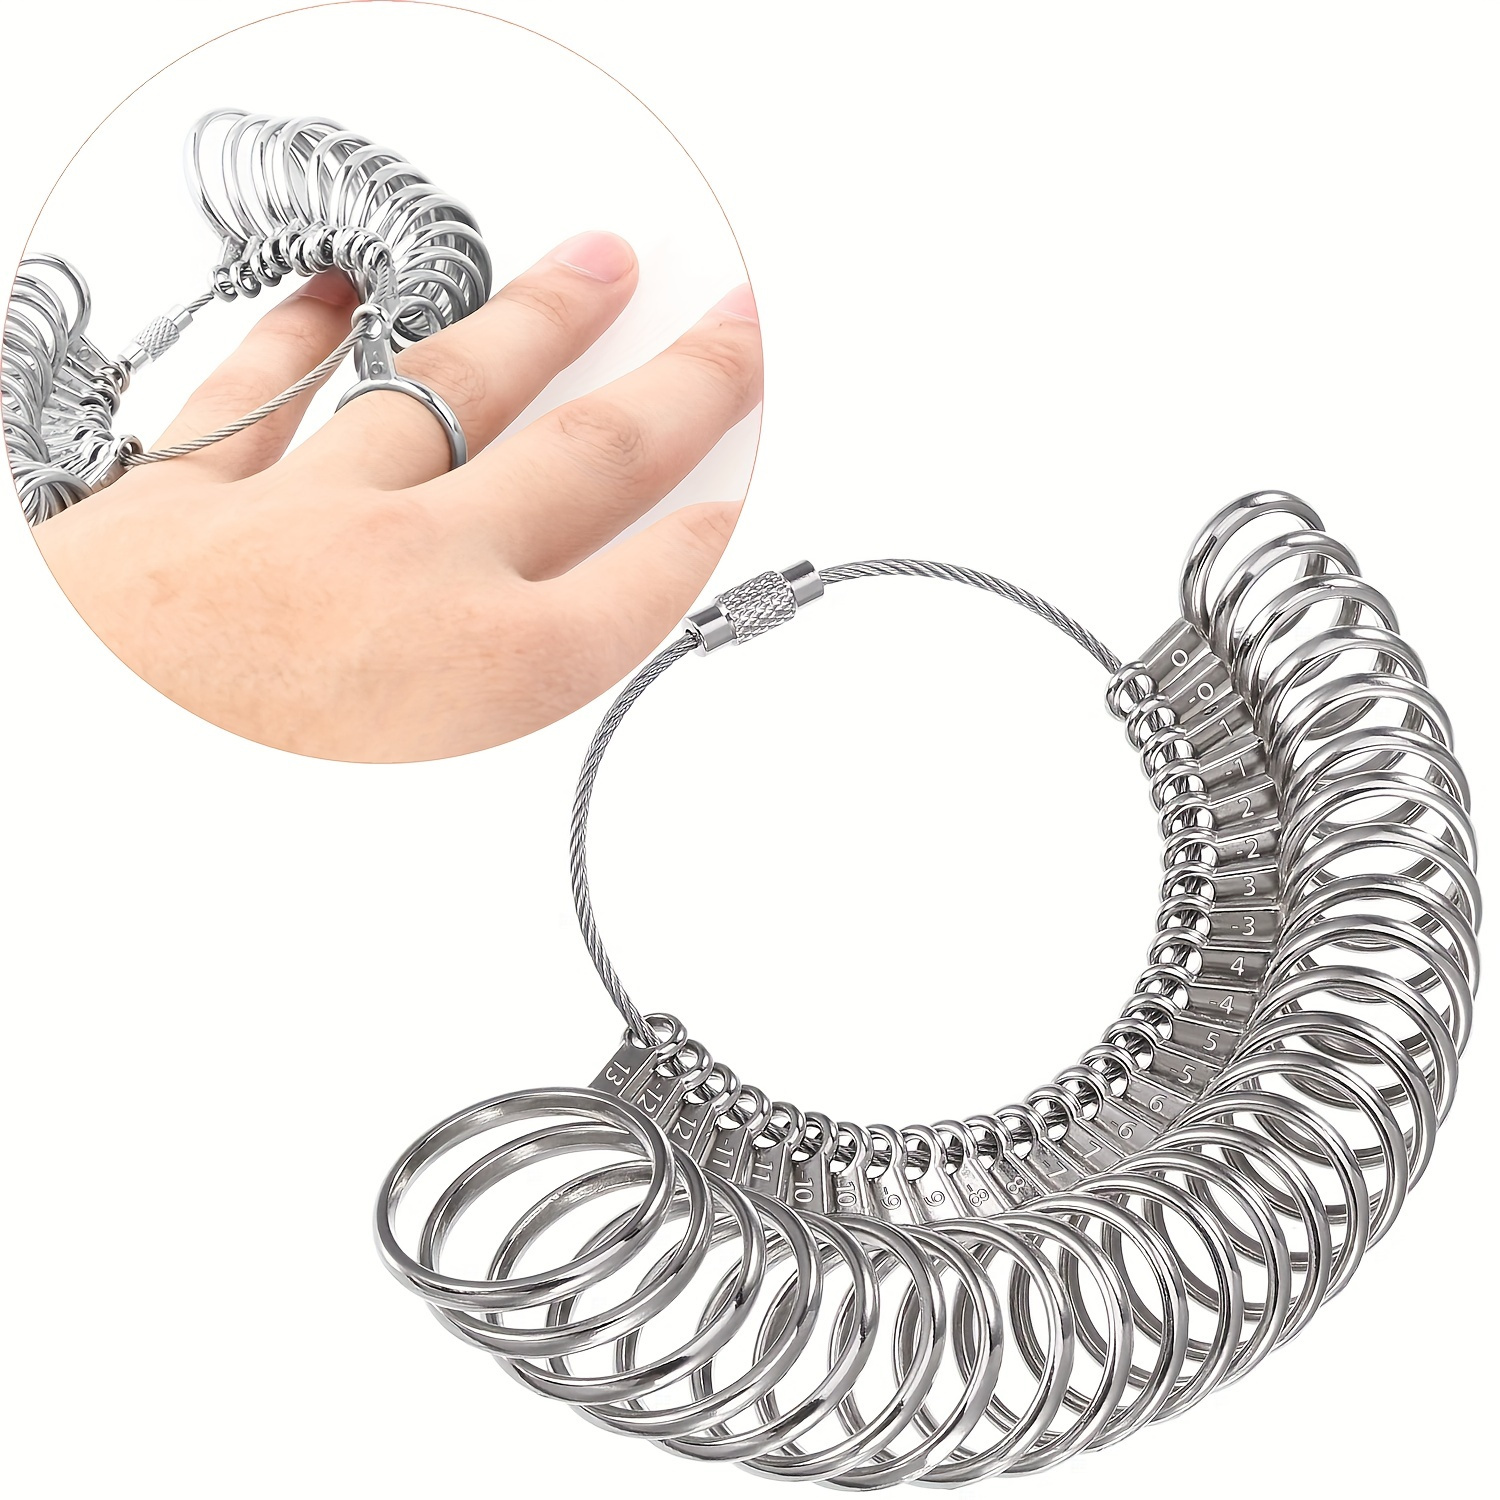 27pcs Ring Size Measuring Tool Set - Accurately Measure Your Finger for the  Perfect Fit!